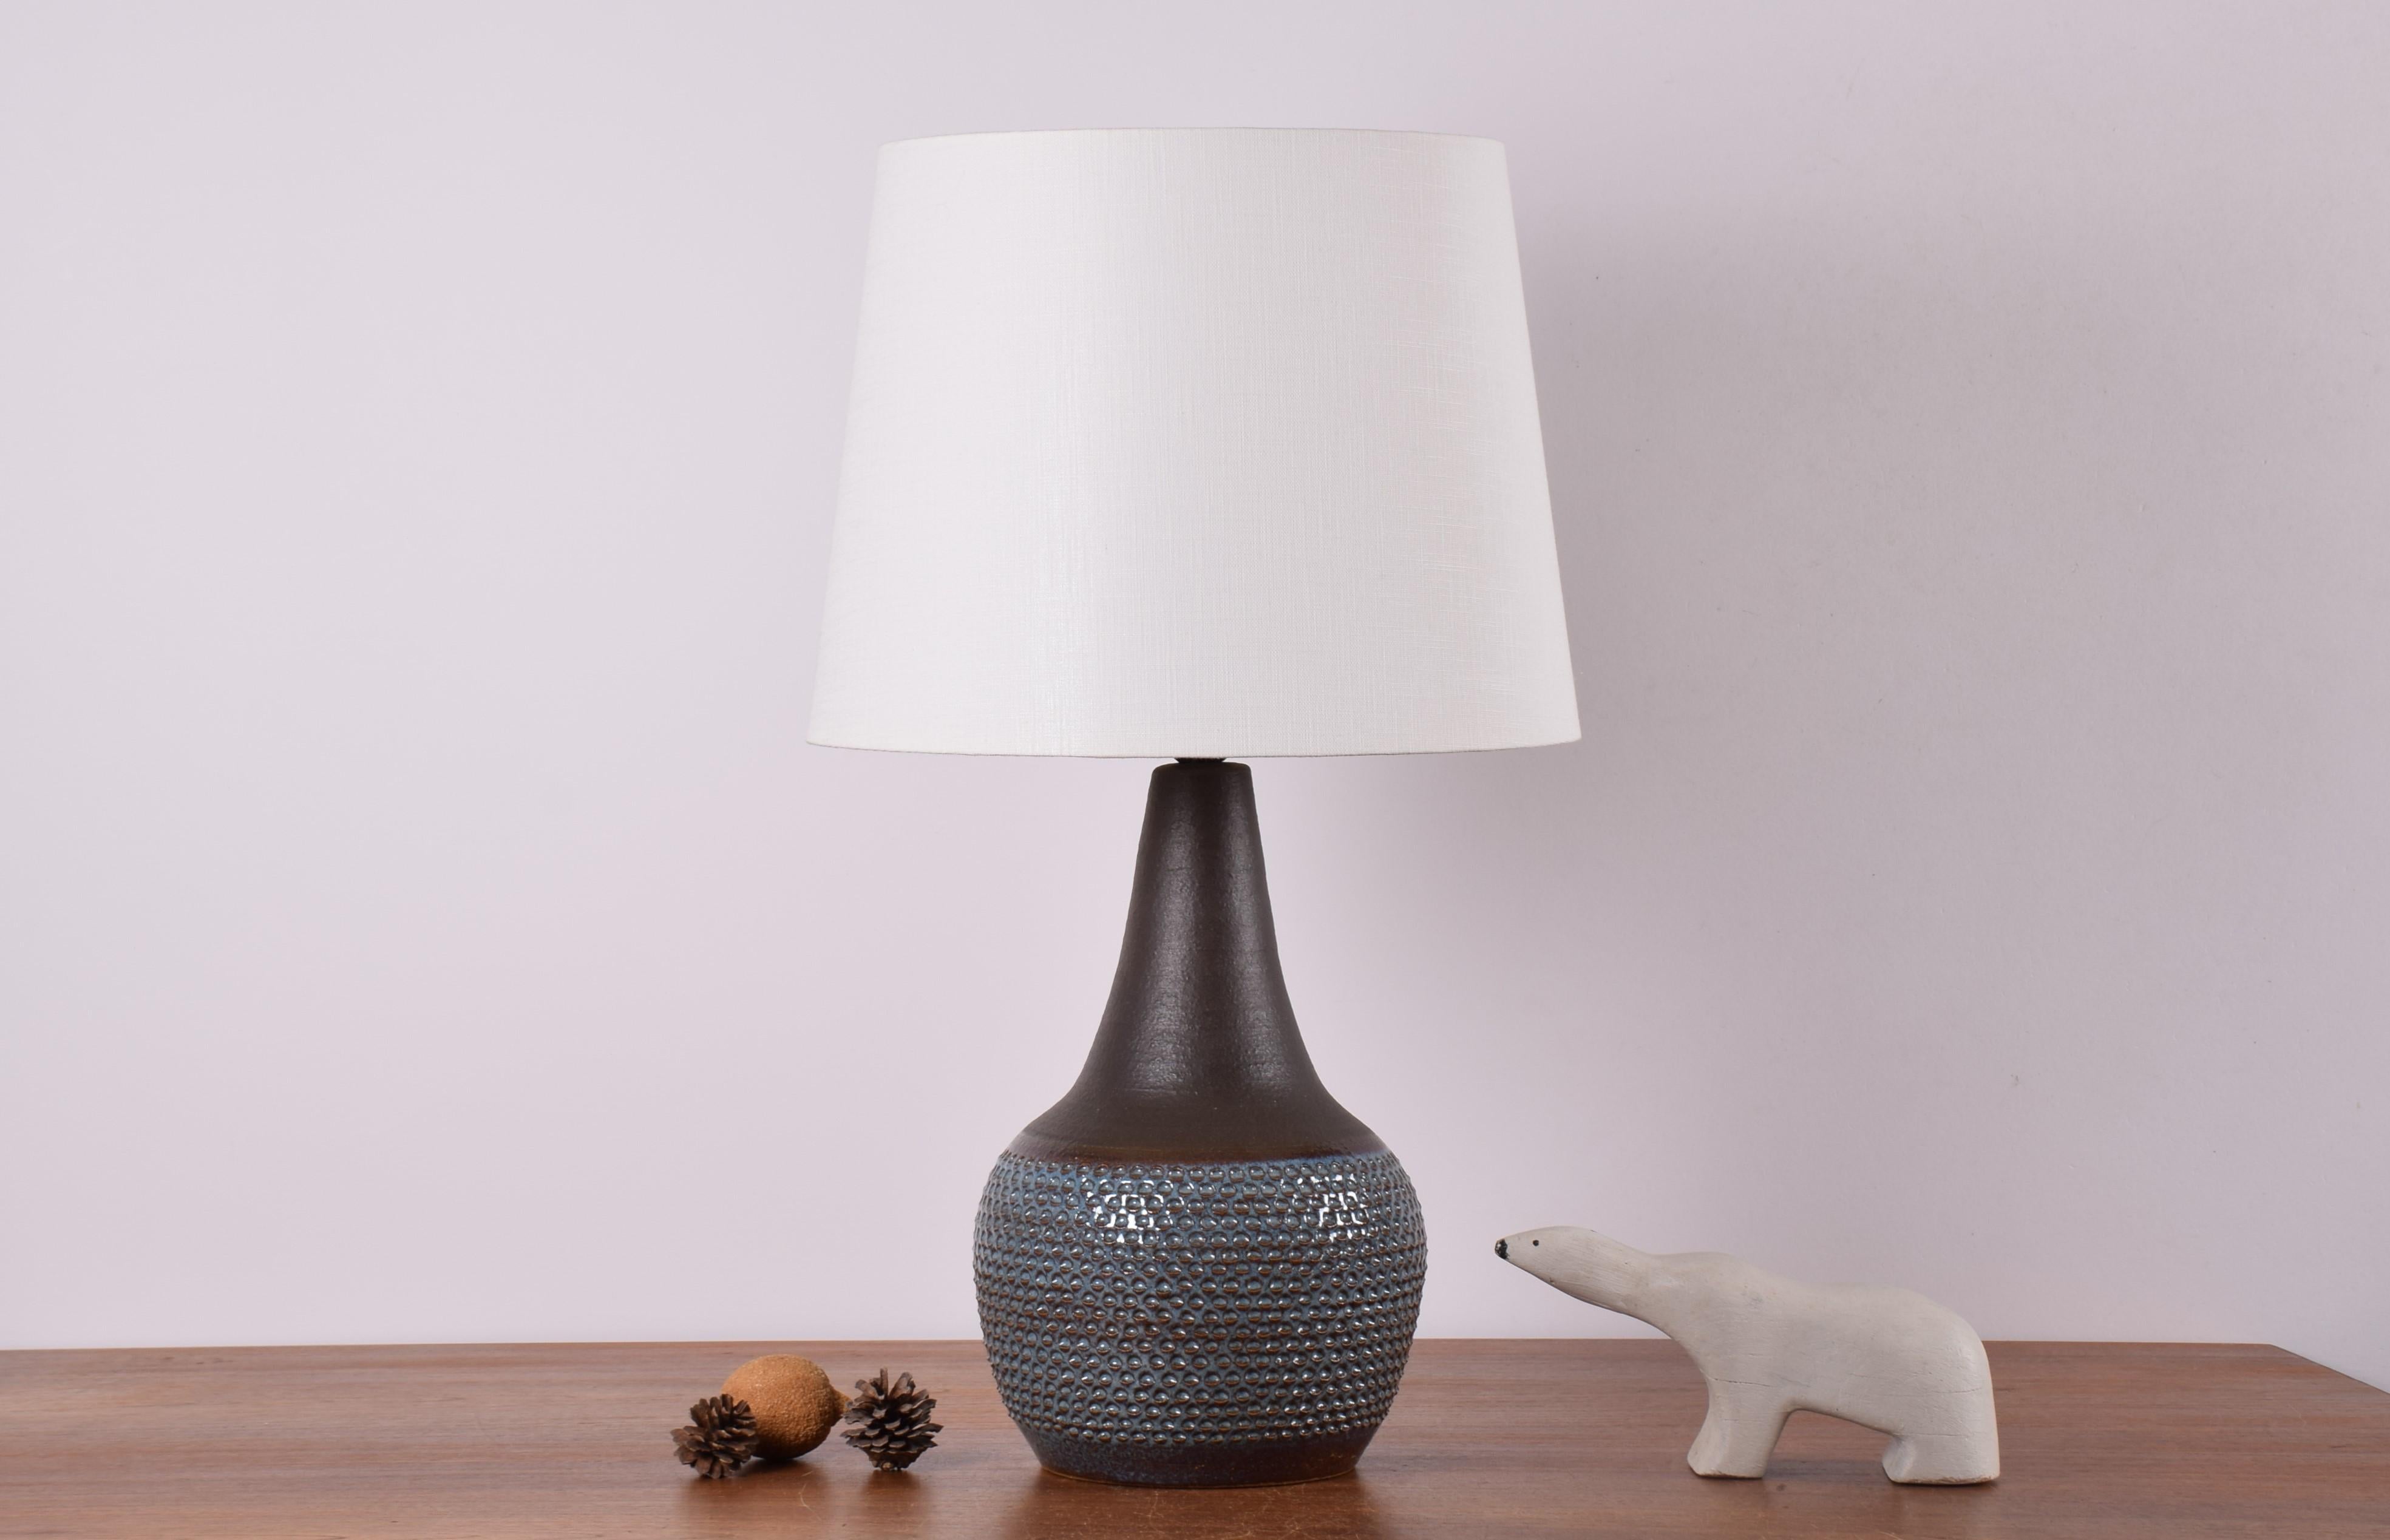 Midcentury tall budded table lamp designed by Einar Johansen for Danish stoneware manufacturer Søholm. Produced, circa 1960s.
This is a rare version of the model 3048, most likely an early, more detailed version.

The lamp has a dark matte brown